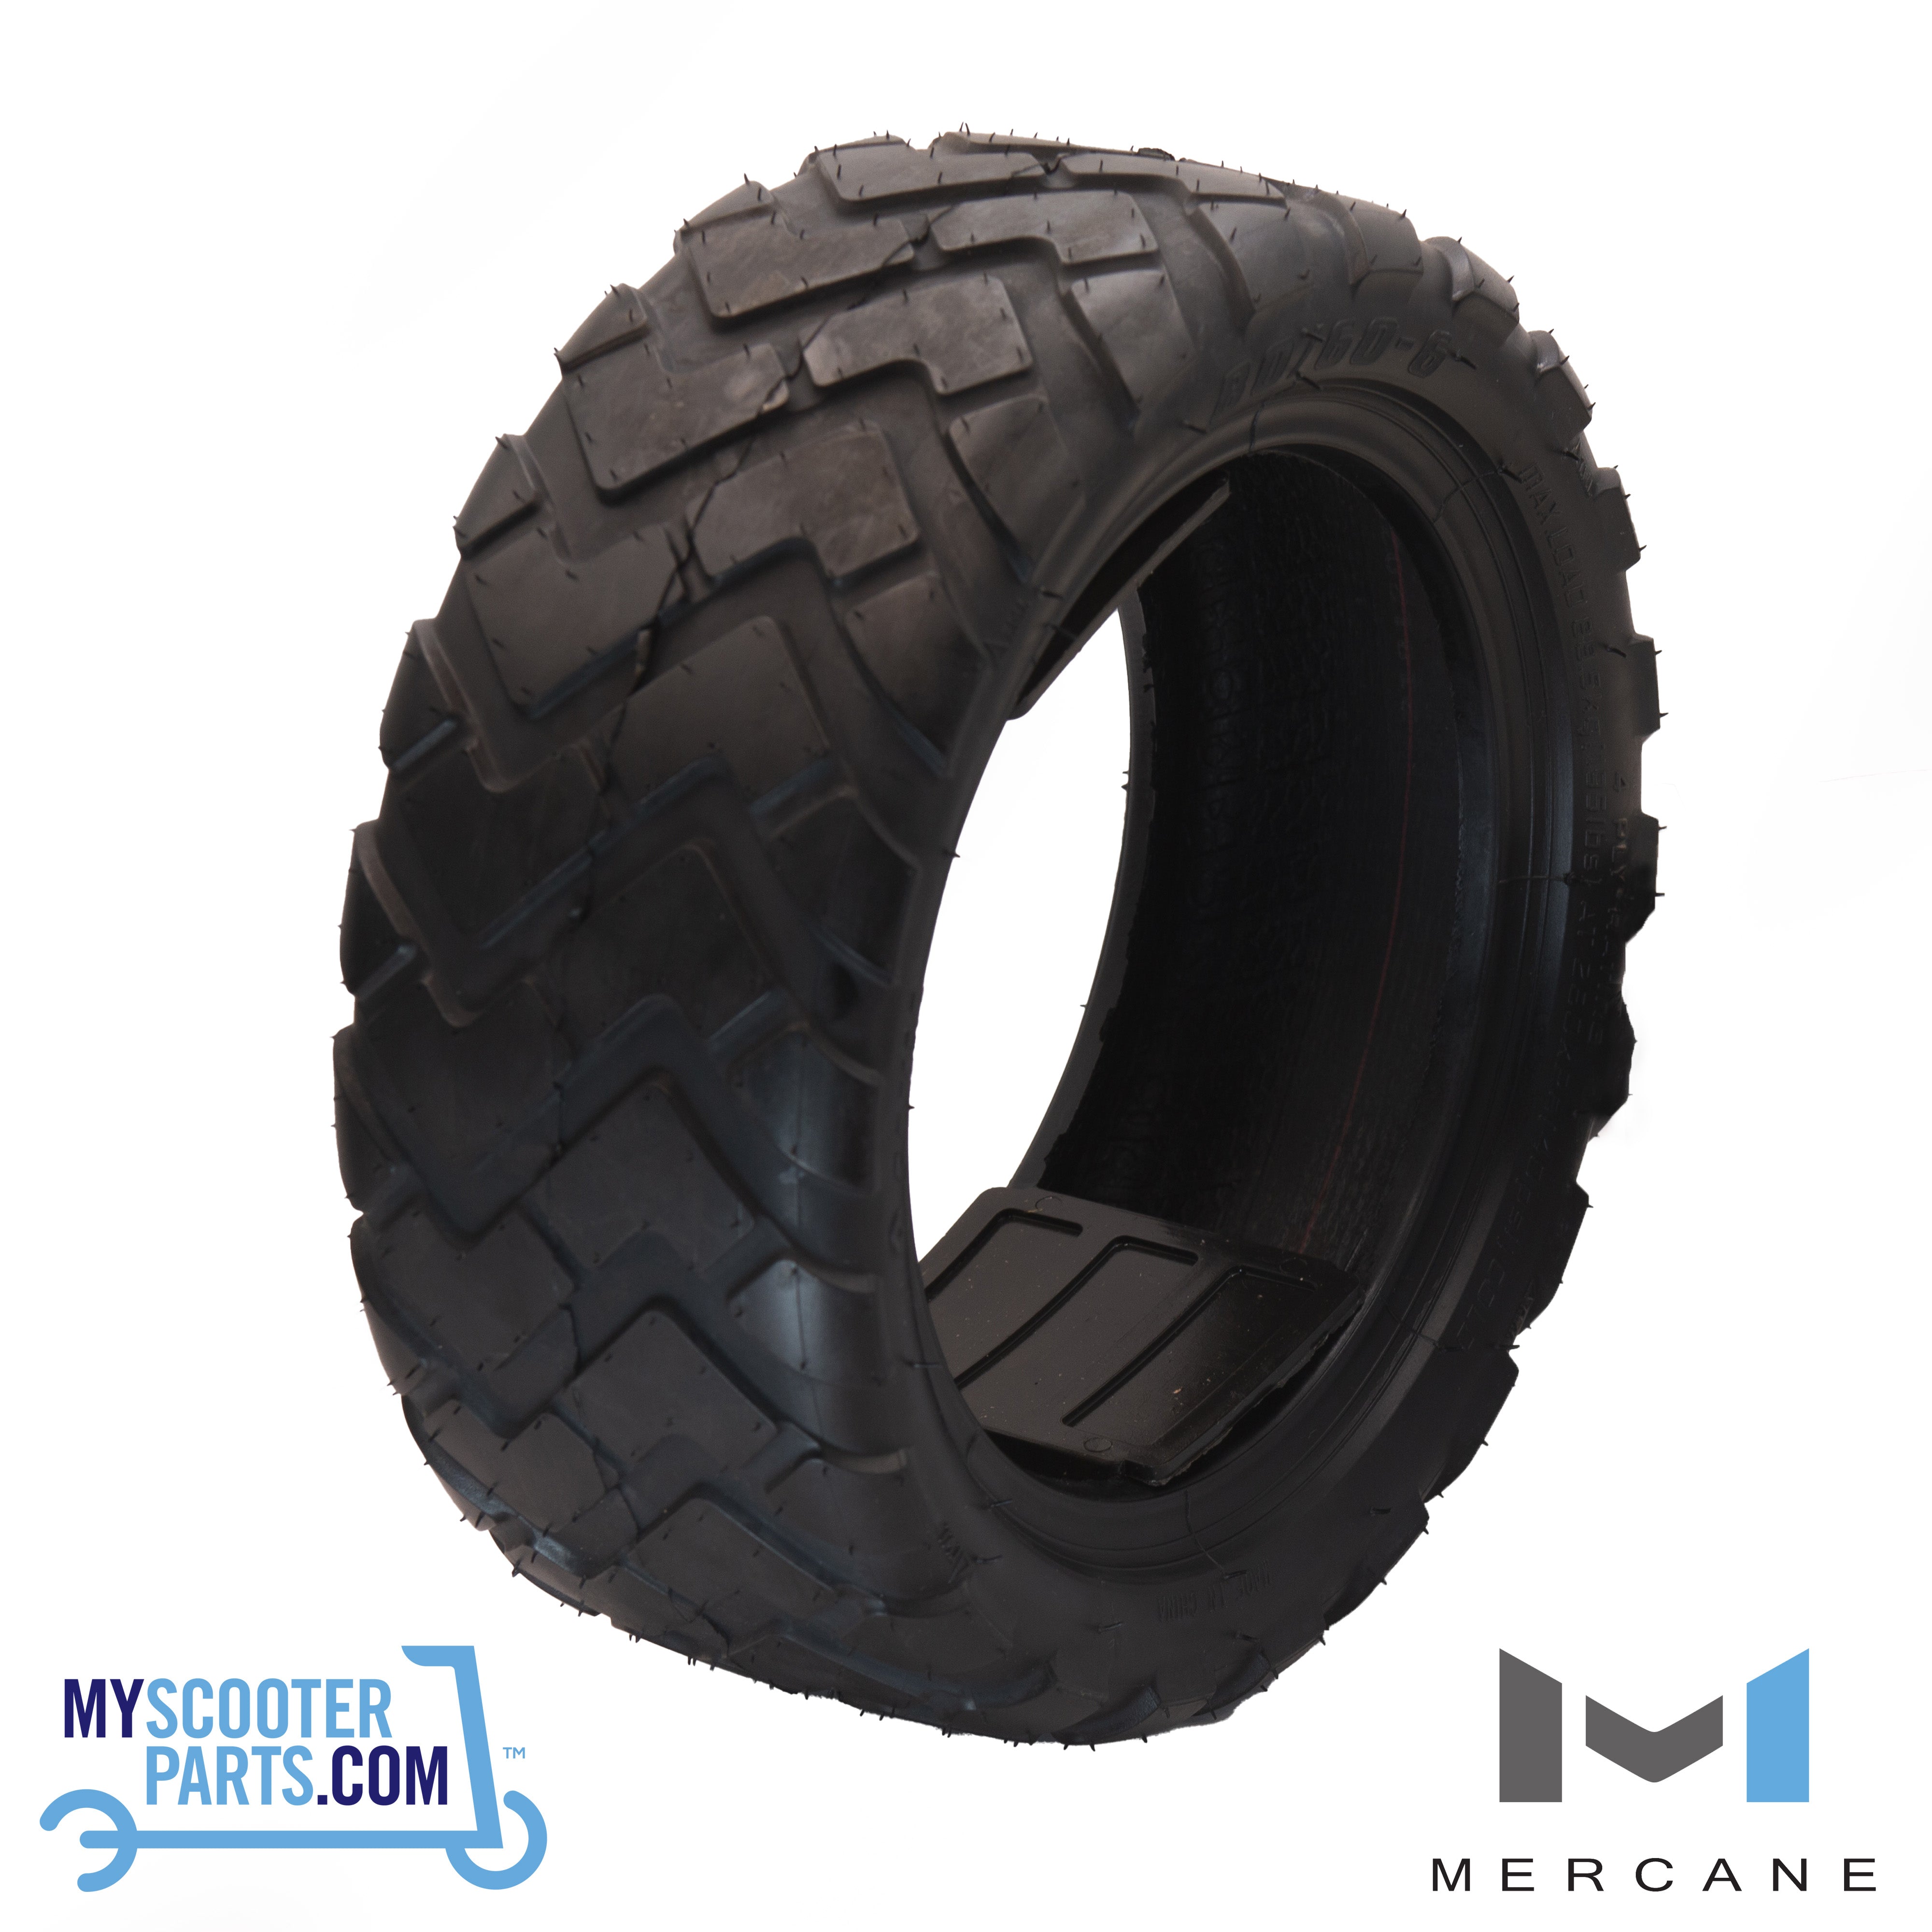 Tubeless Tire 8.5 x 3 for Xiaomi Scoooters model 1 tire CityRoad tubeless